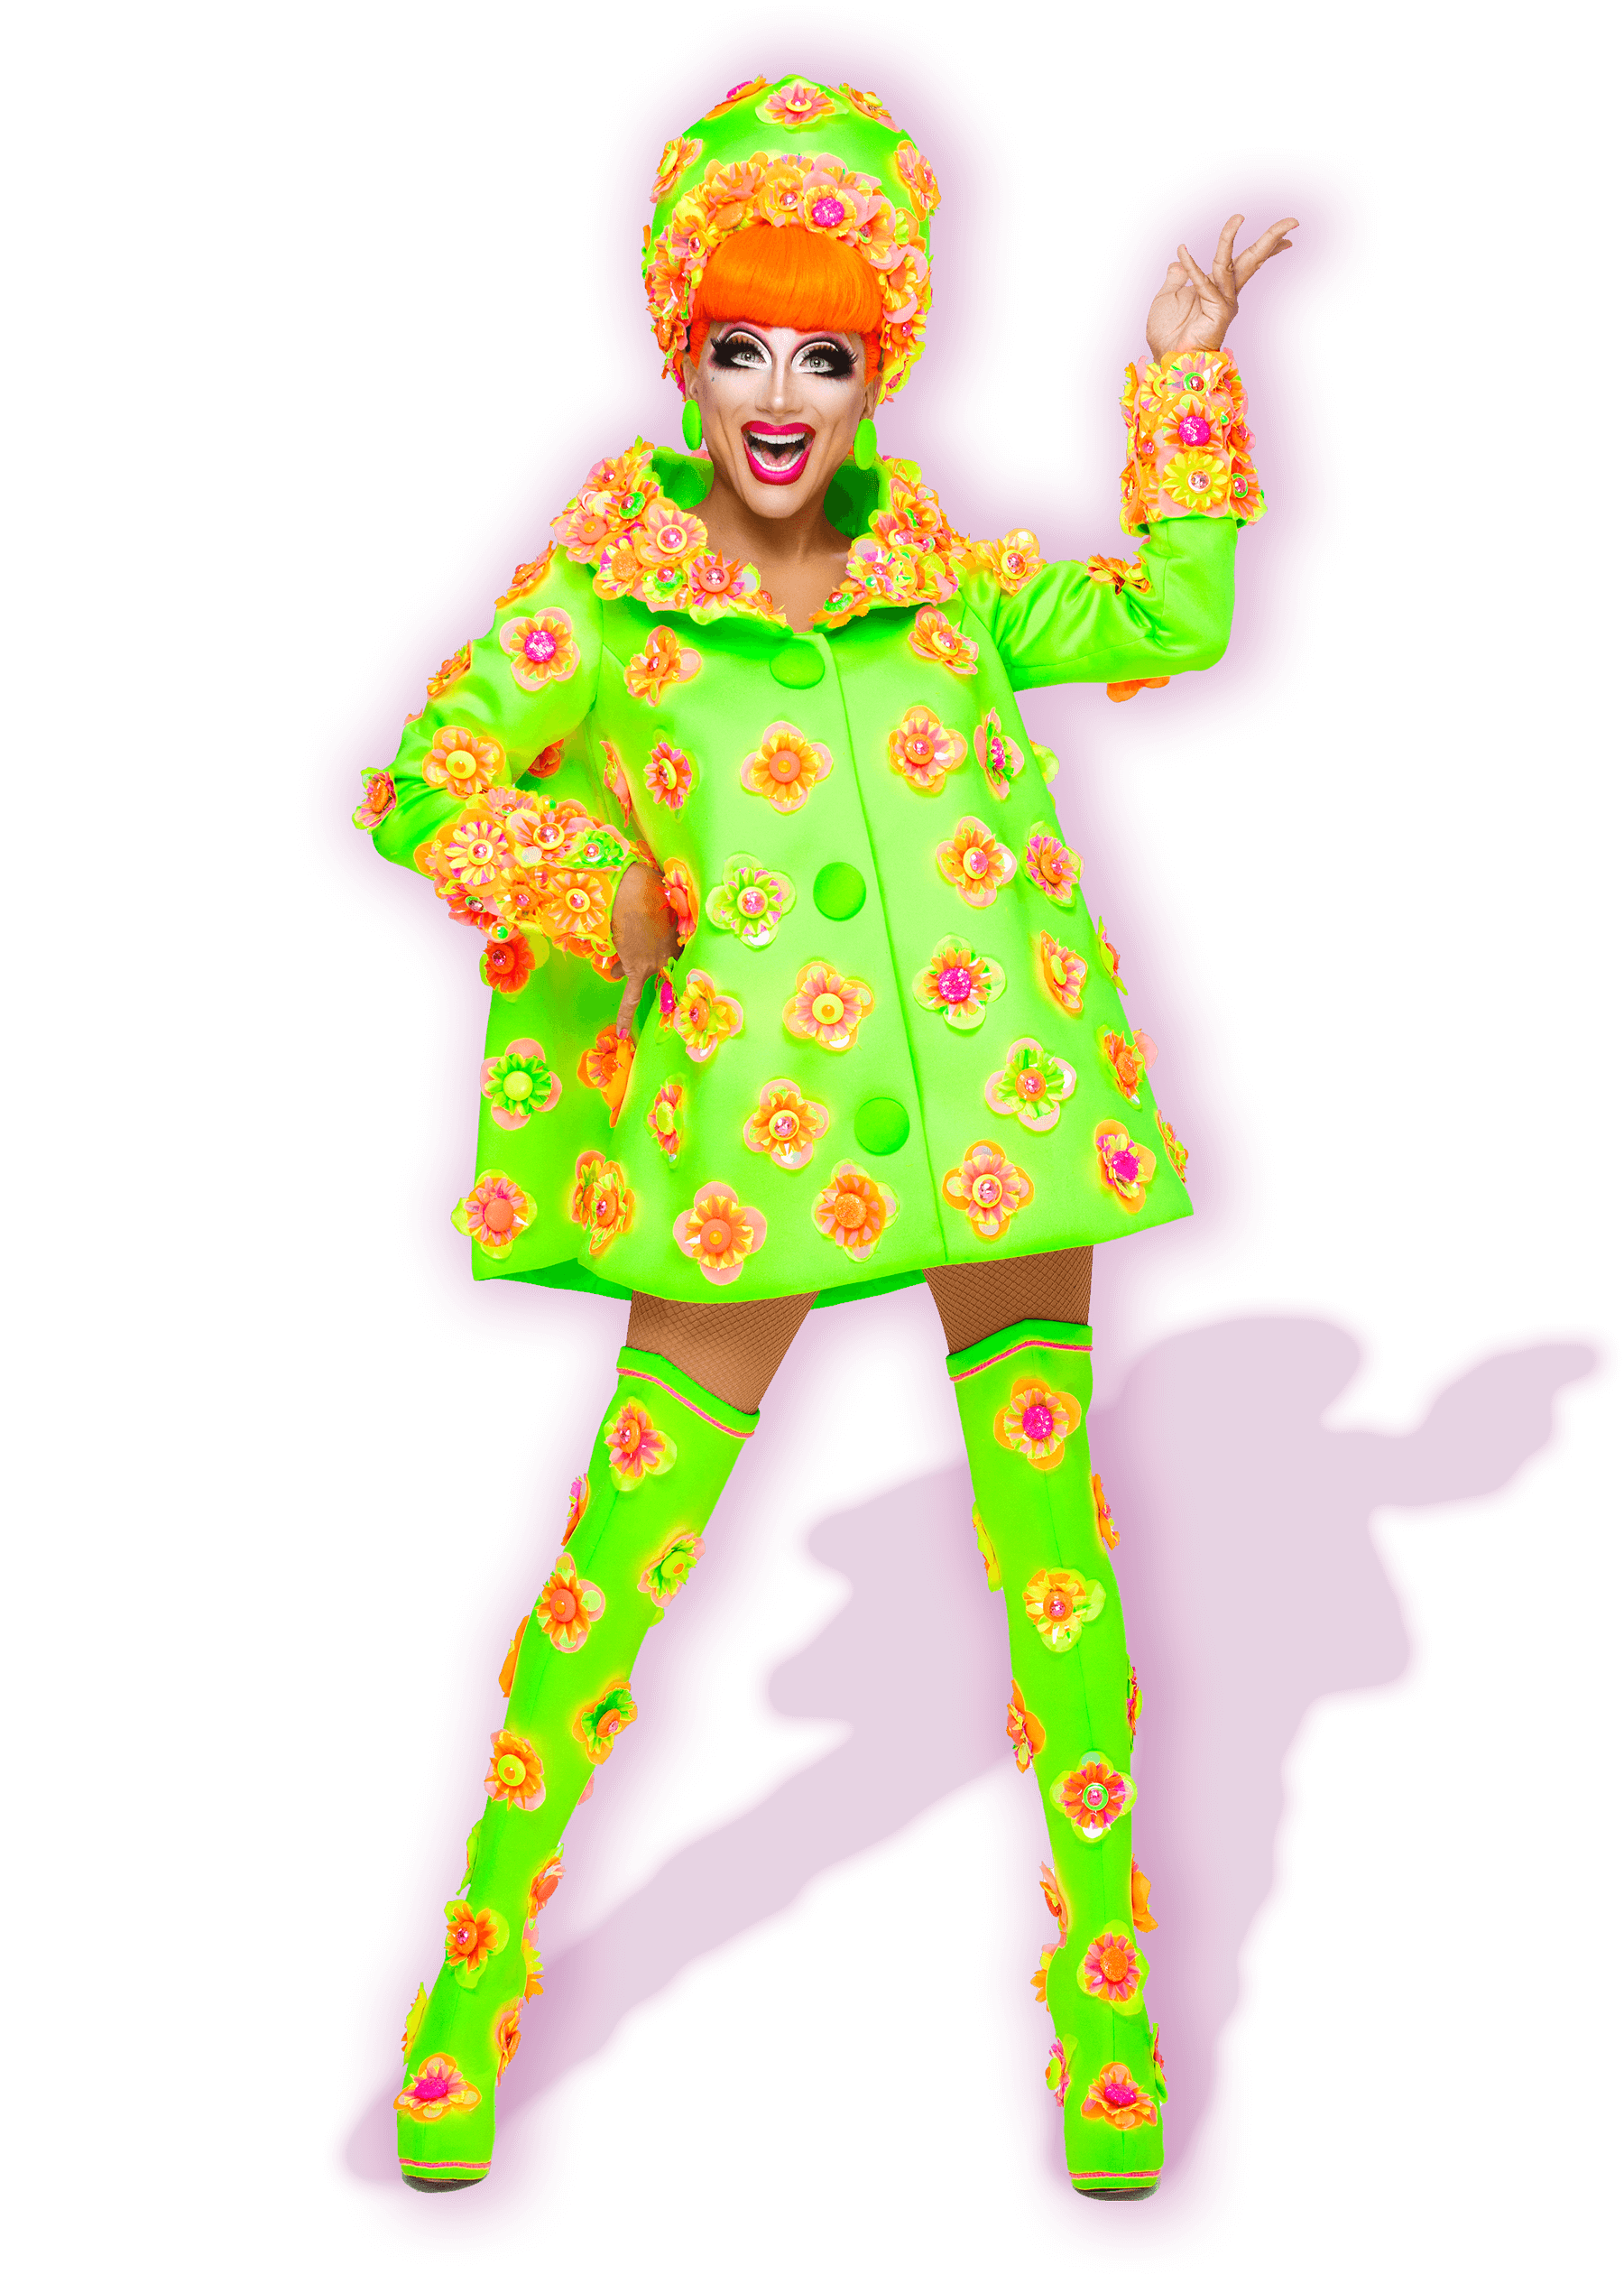 Photo of Bianca Del Rio wearing a neon green dress with bright orange flower detailing. She is wearing a fluoro orange wig and smiling.